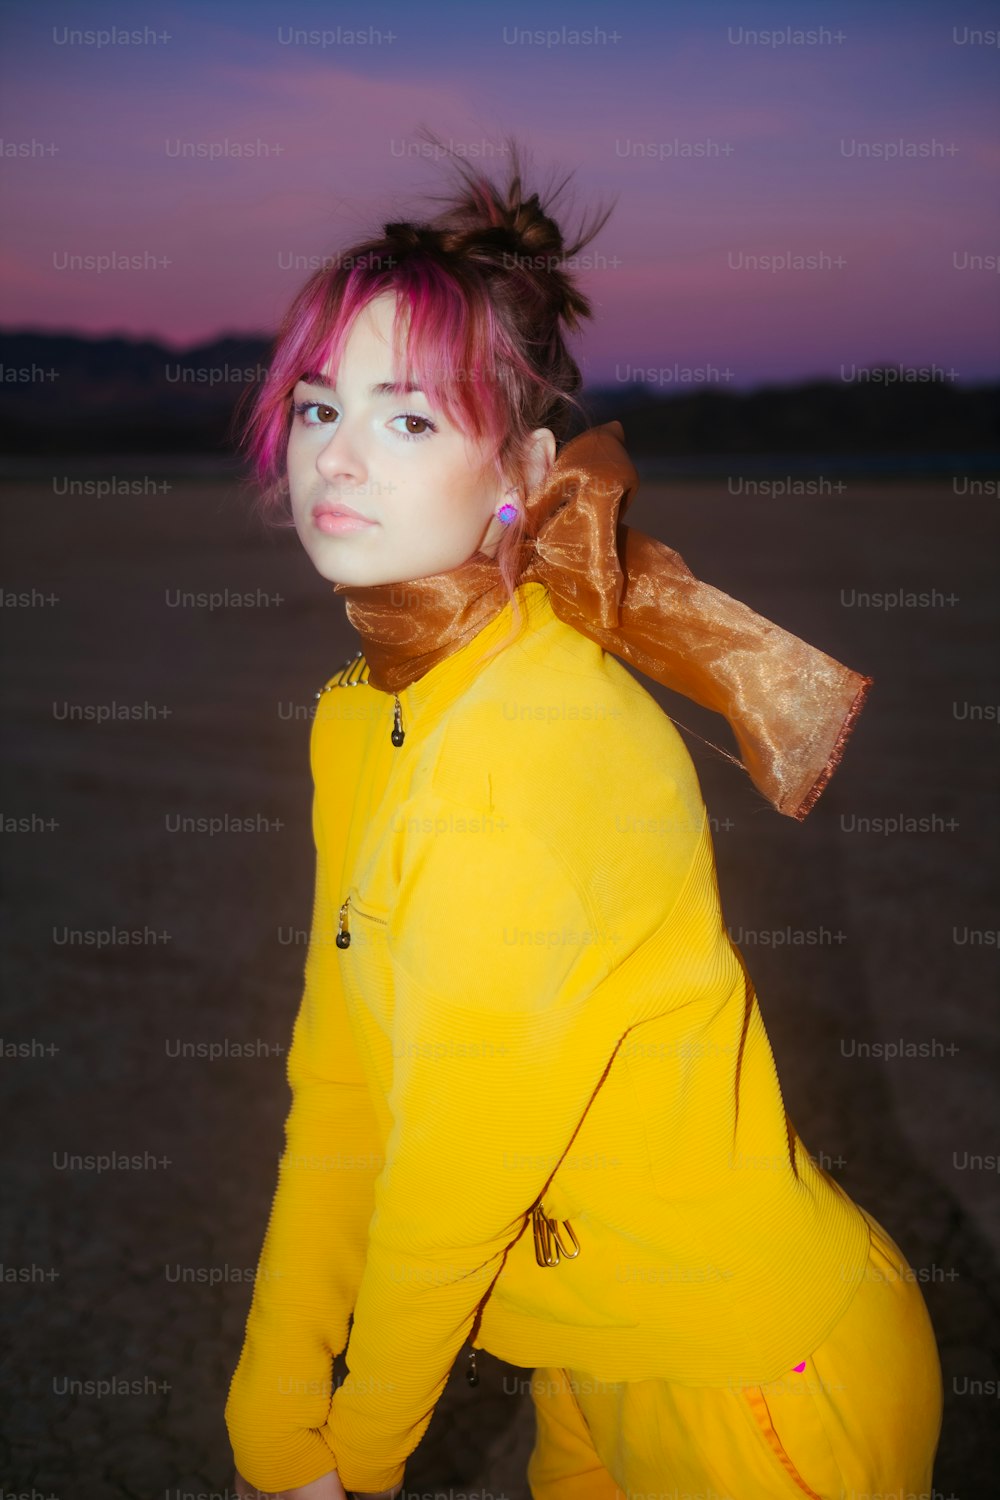 a woman with pink hair wearing a yellow outfit